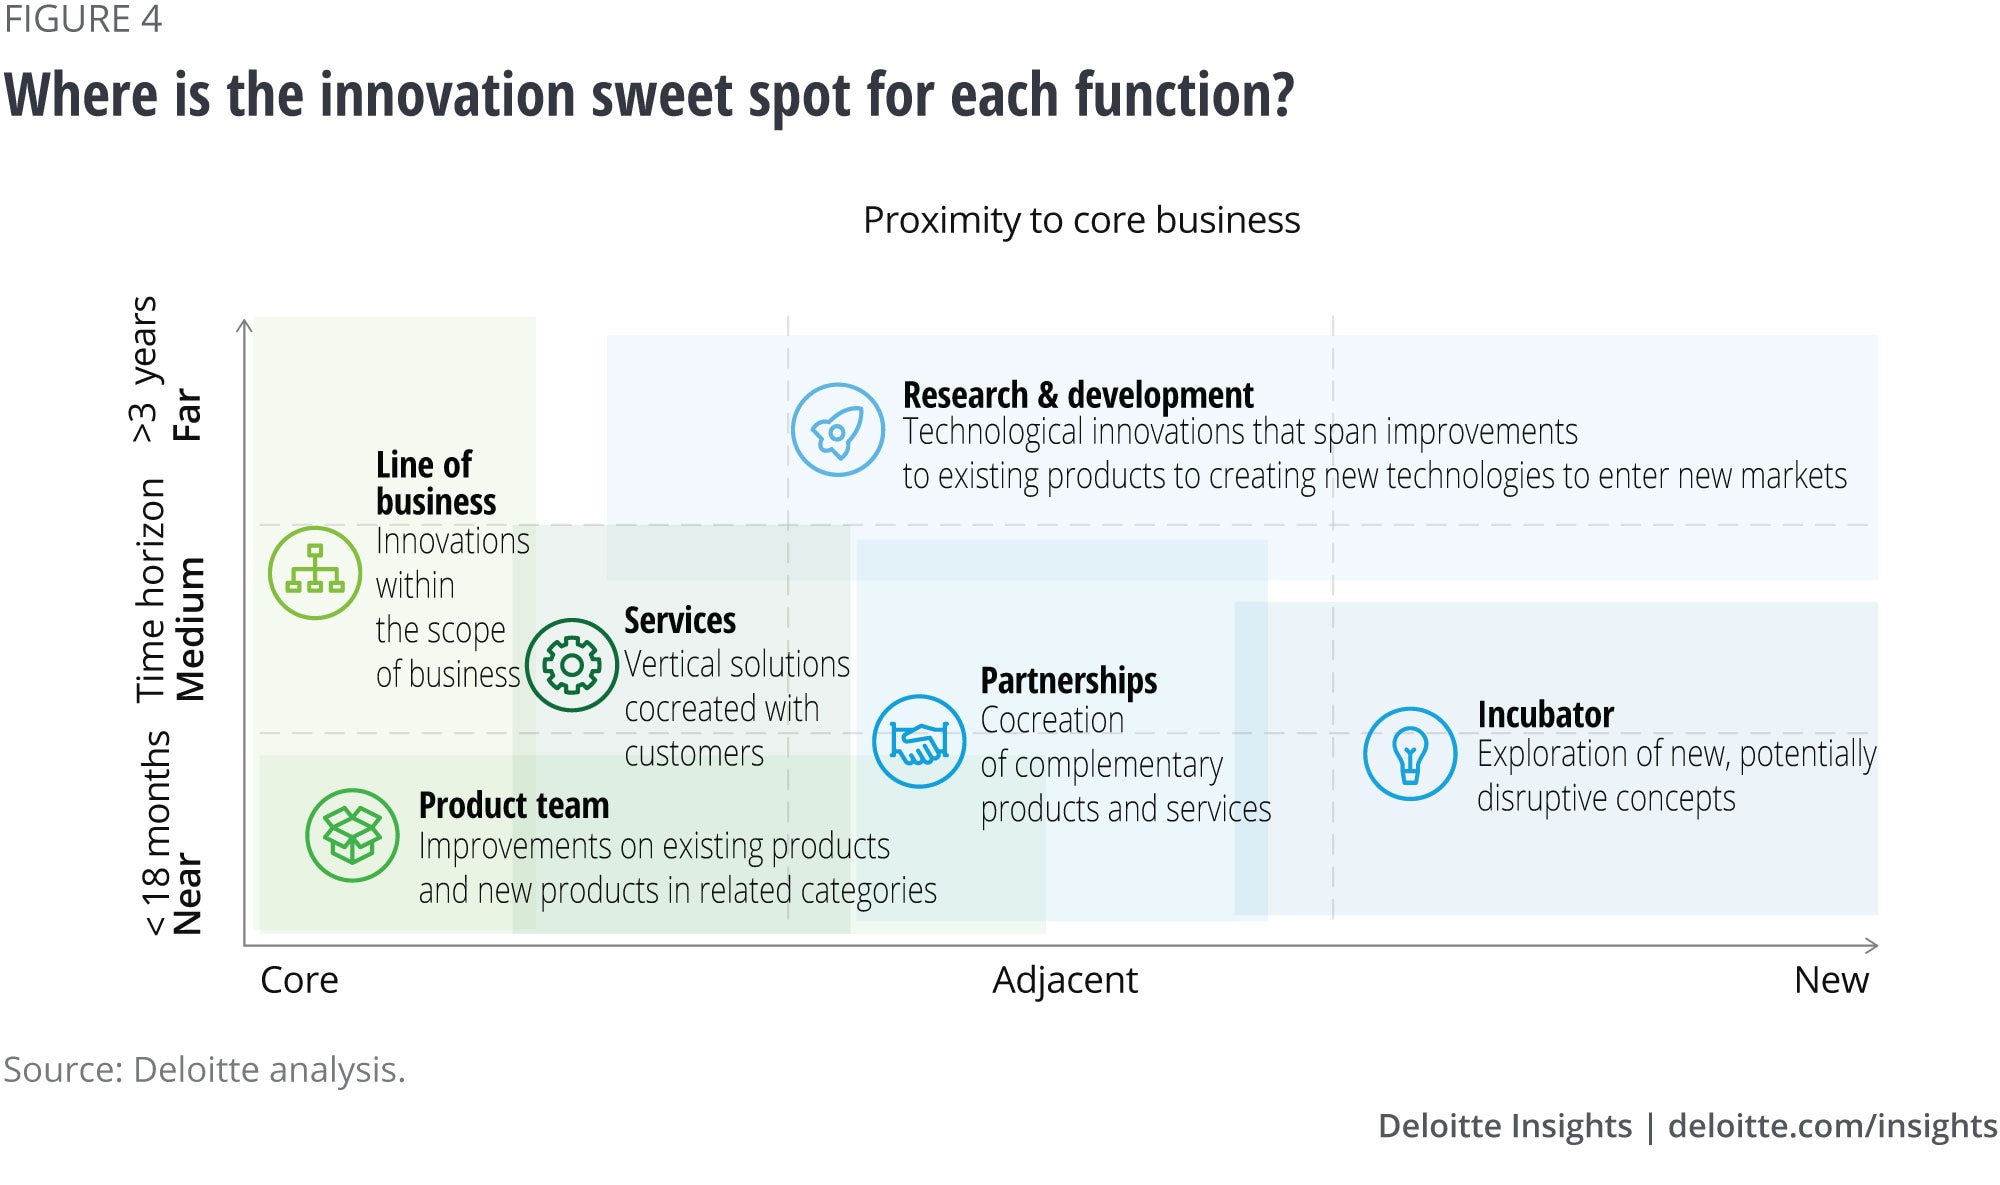 Where is the innovation sweet spot for each function?